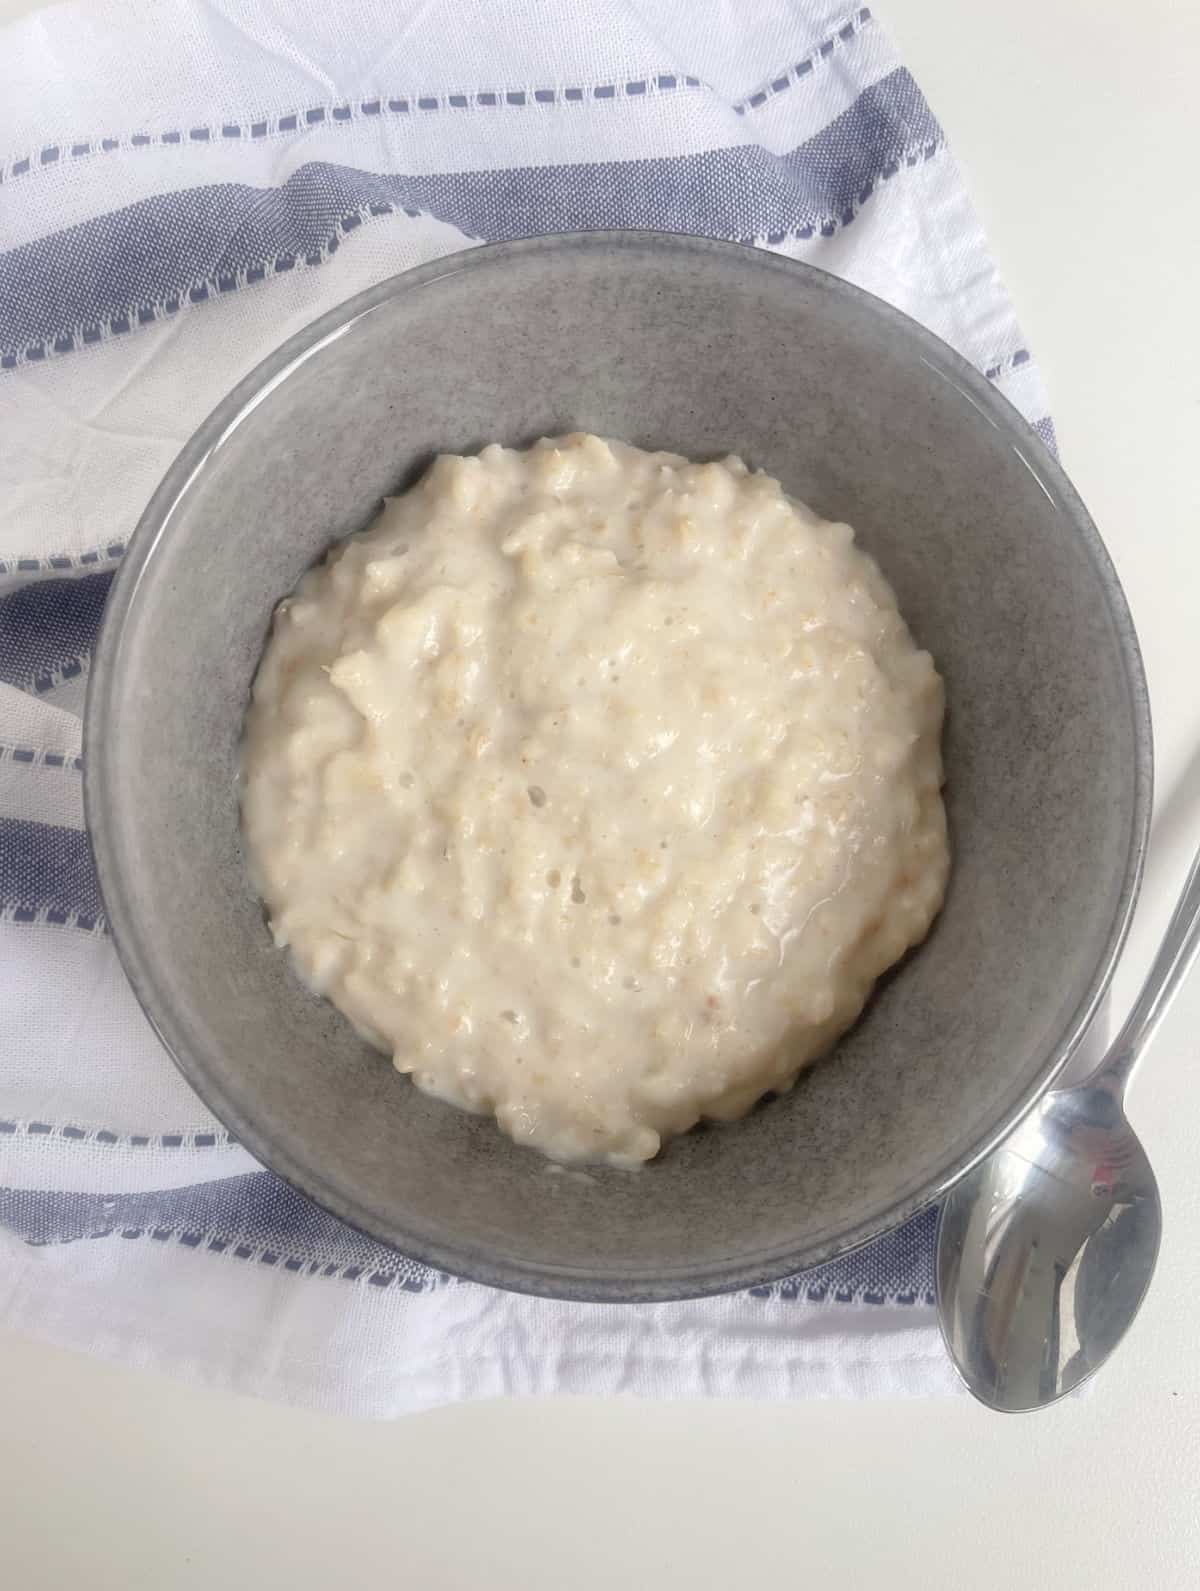 Porridge in a grey bowl with silver spoon next to it.